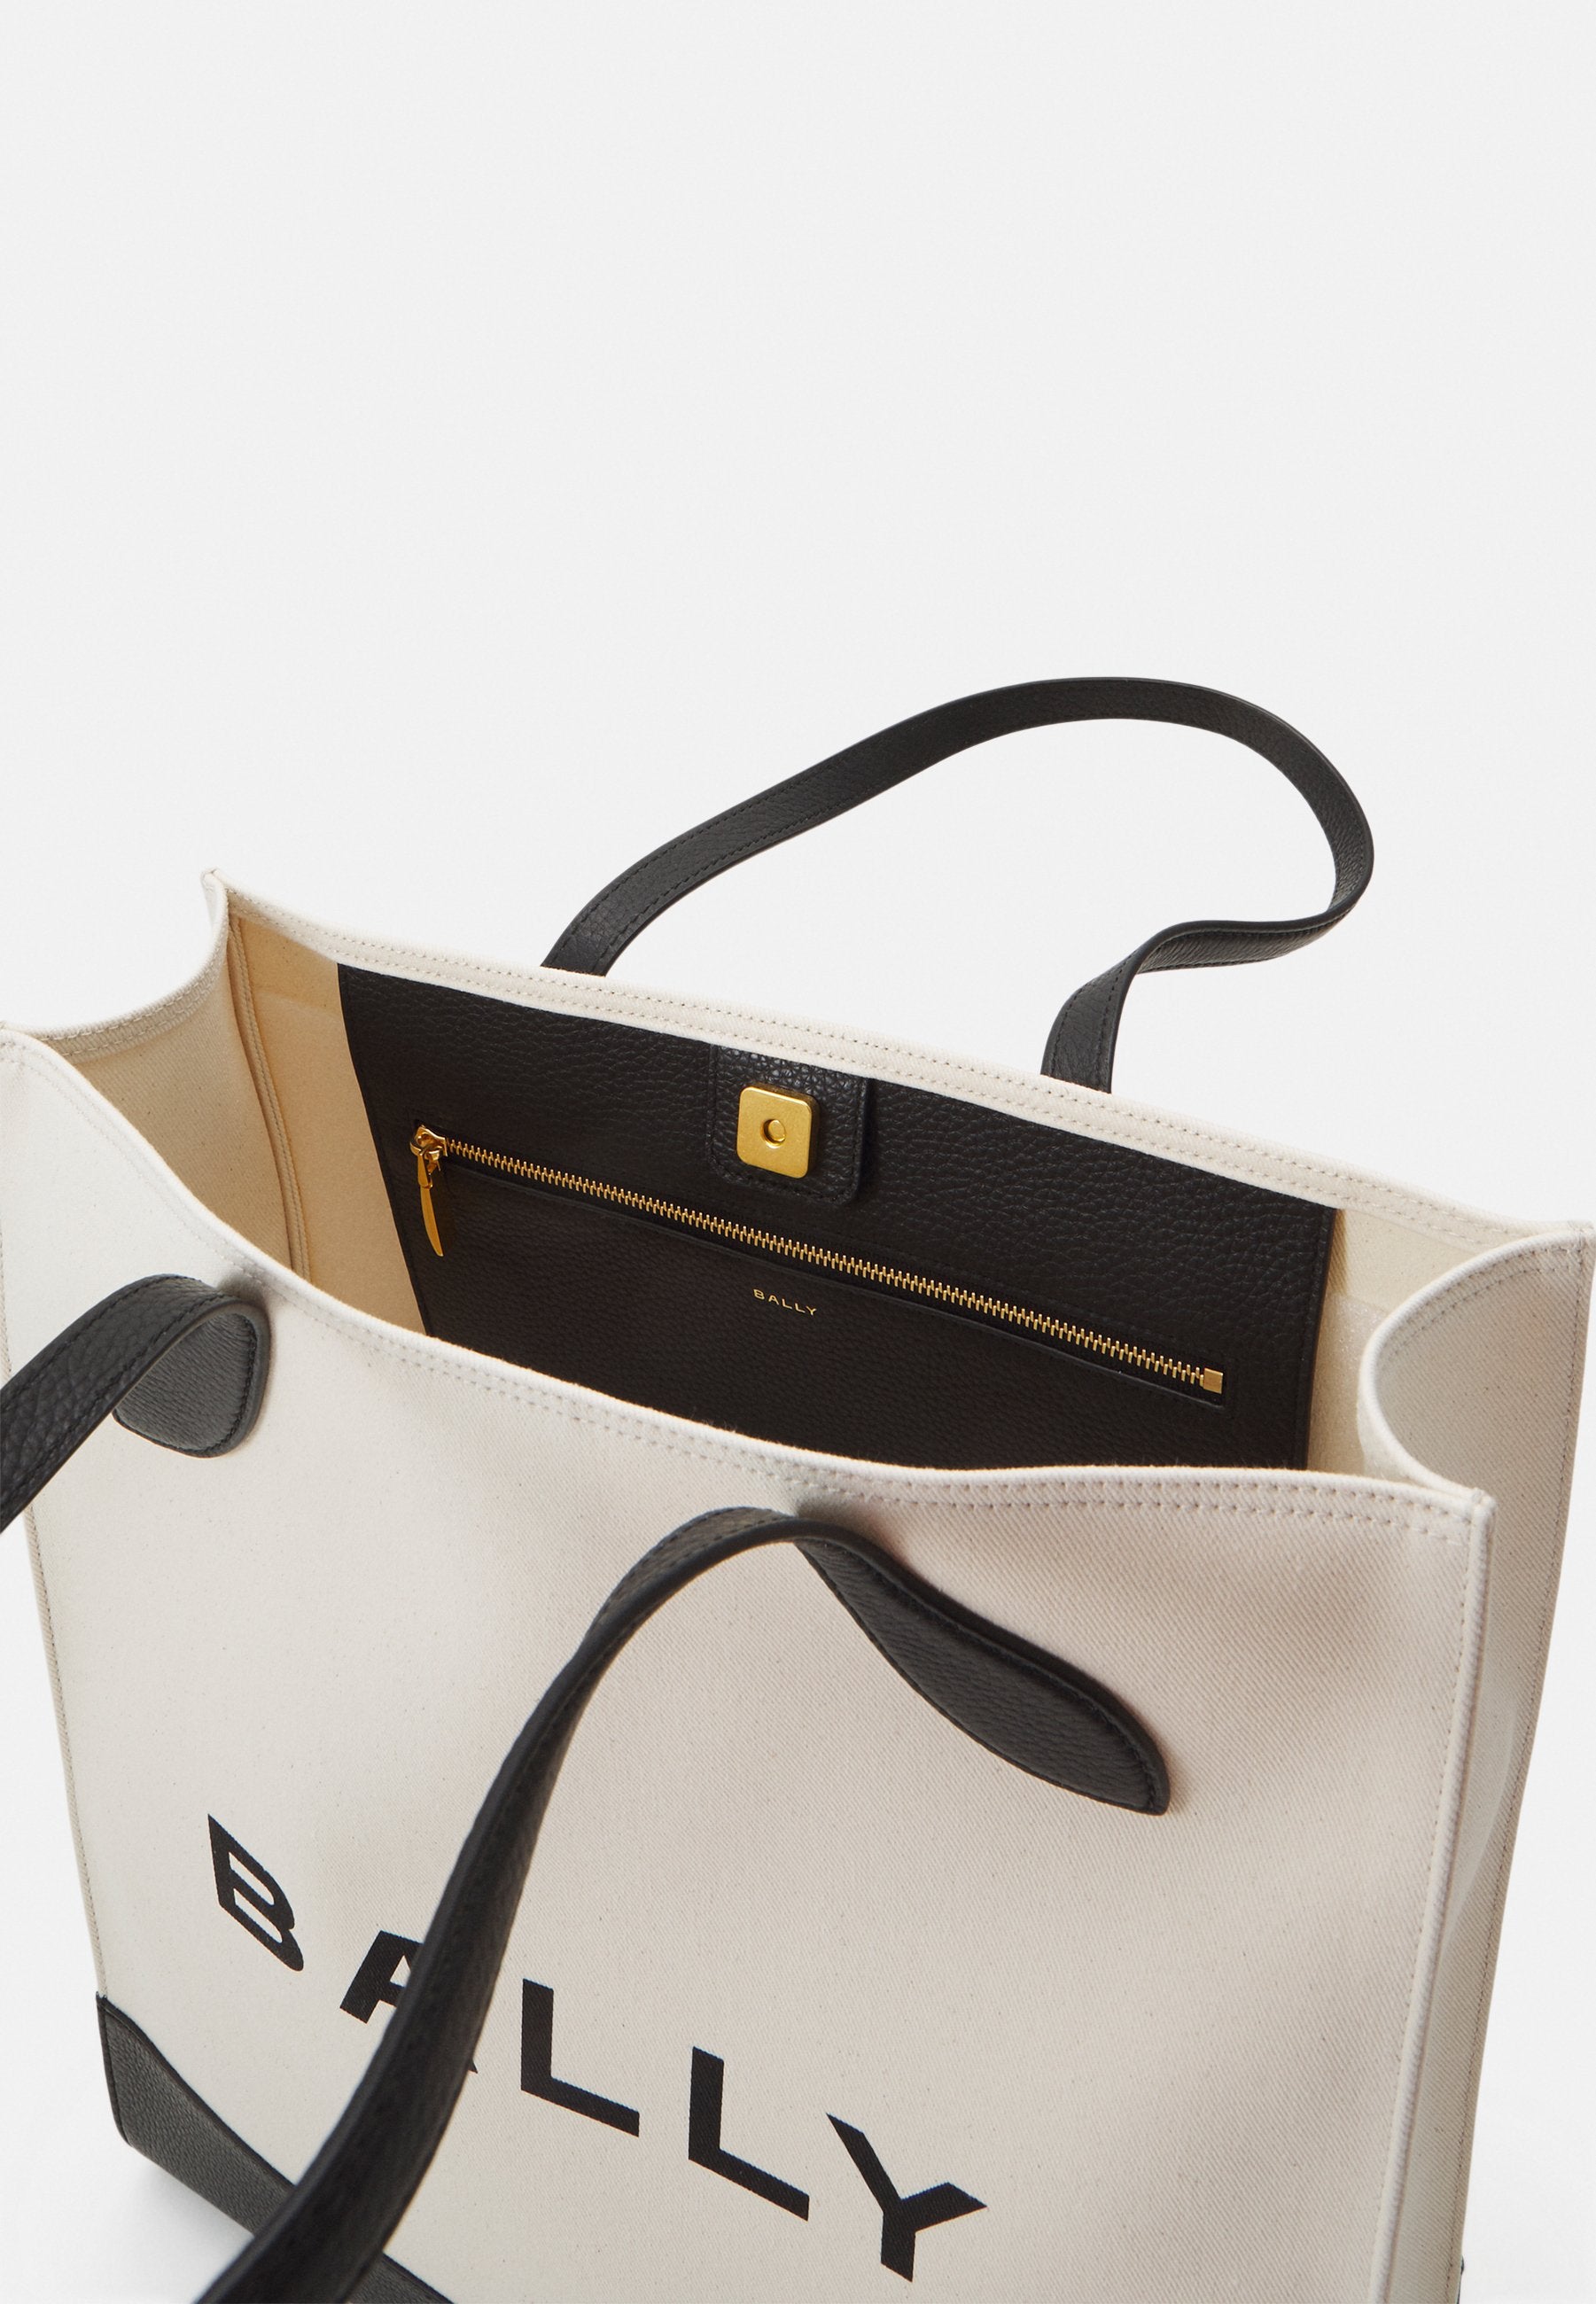 Bally White and Black Leather Tote Shoulder Bag